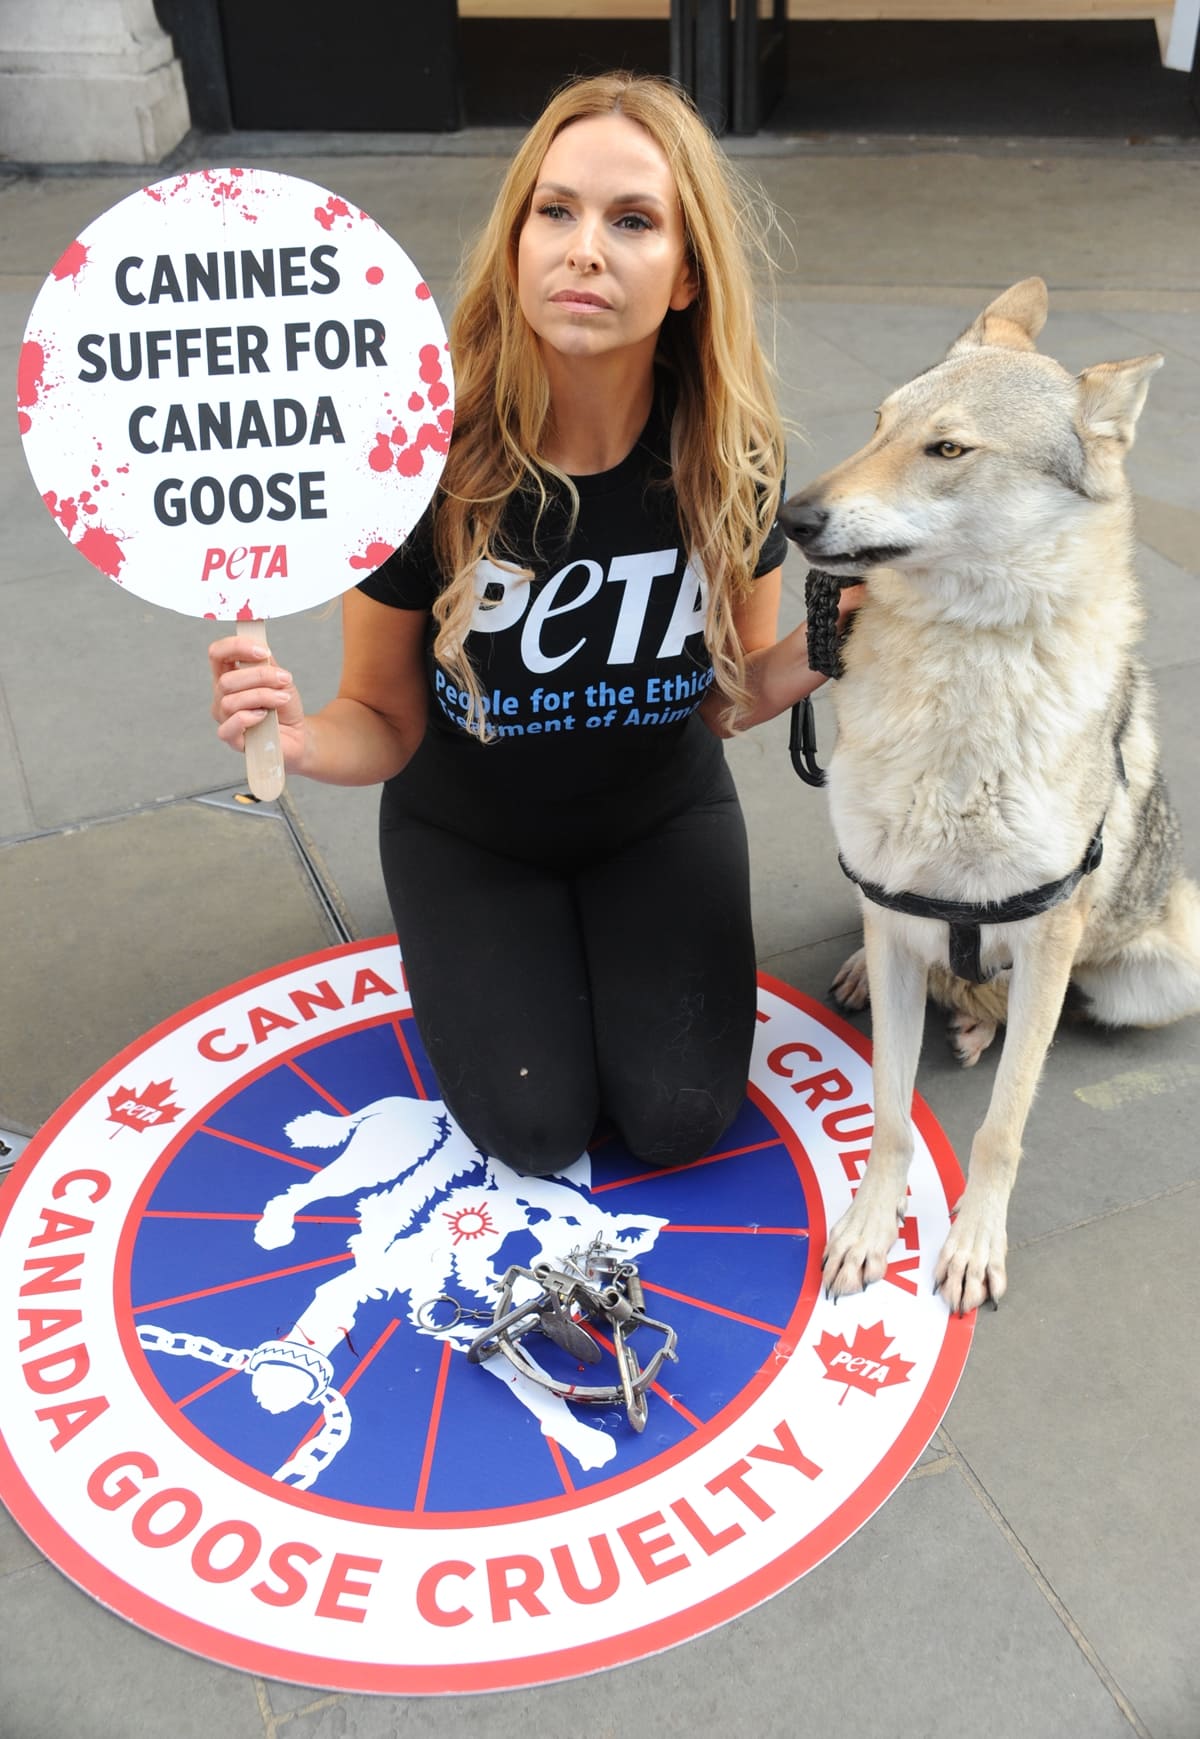 UK TV presenter and animal expert Anneka Svenska, and her canine companion Will, join the PETA campaign to end trapping and killing of coyotes for fur-trimmed coats